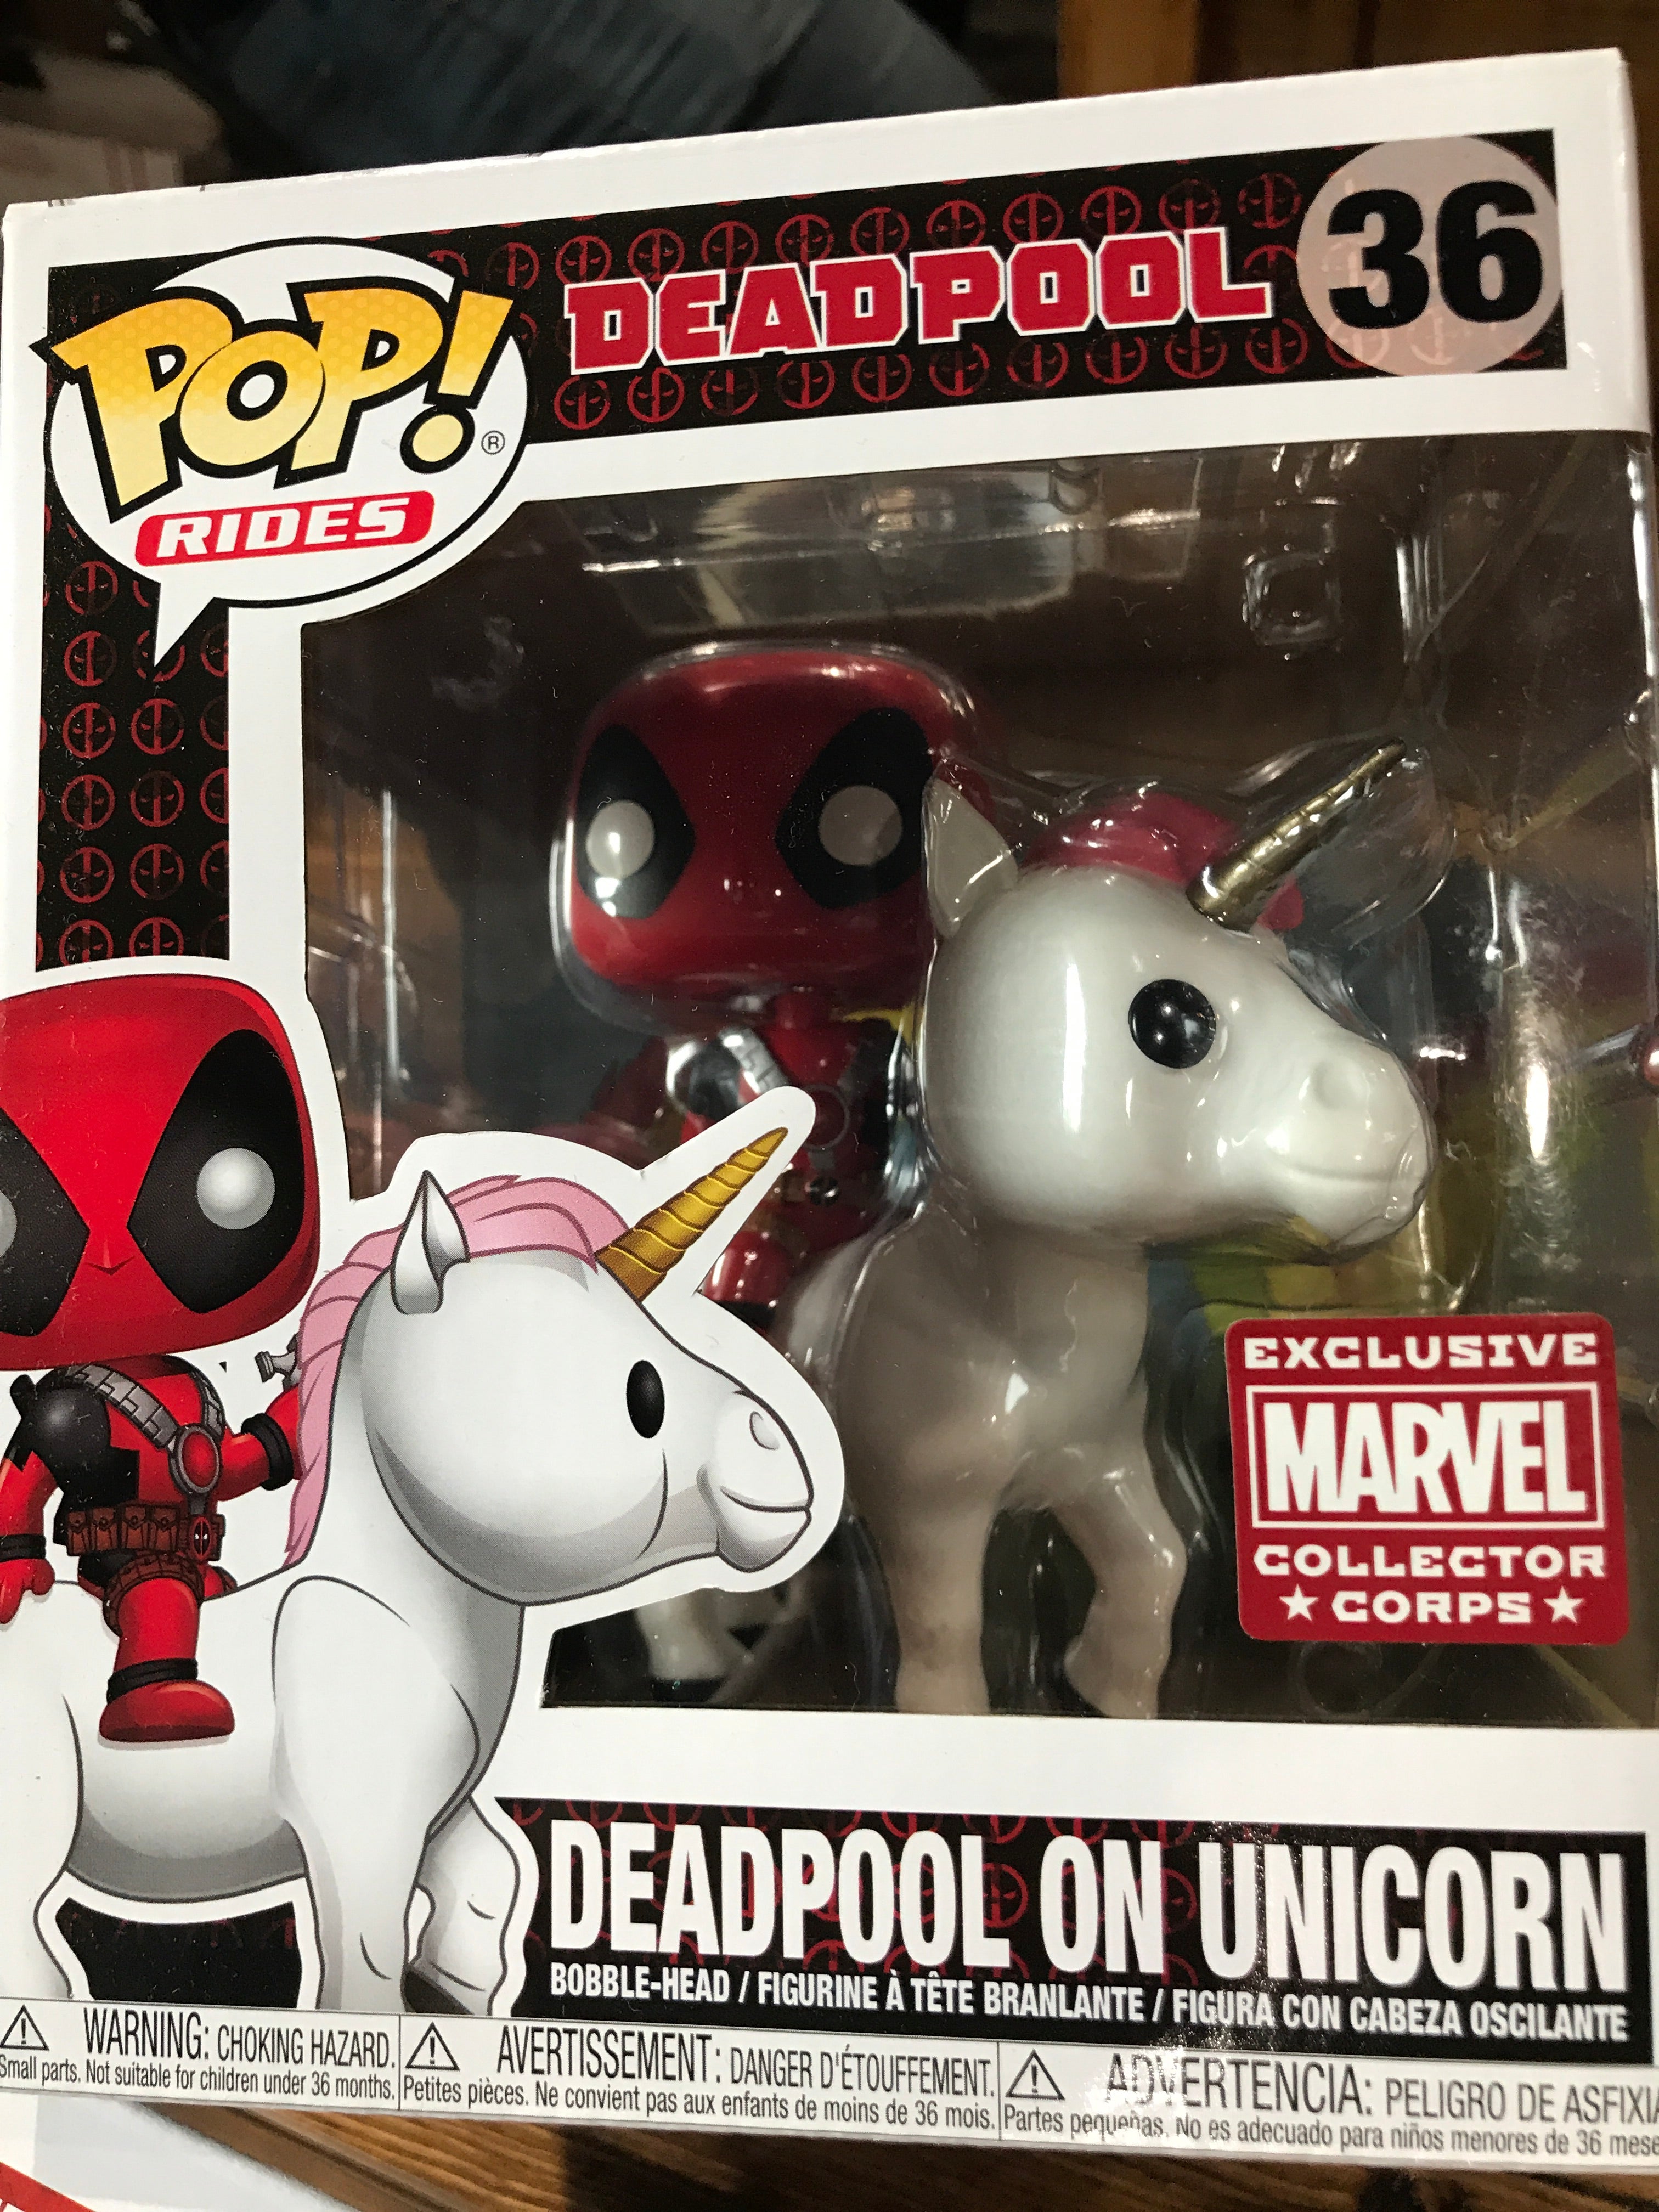 Funko Pop Rides Deadpool On Unicorn #36 Pvc Action Figure Toys Funko Pop  Collectible Vinyl Dolls Gifts For Children Brinquedos - Action Figures -  AliExpress